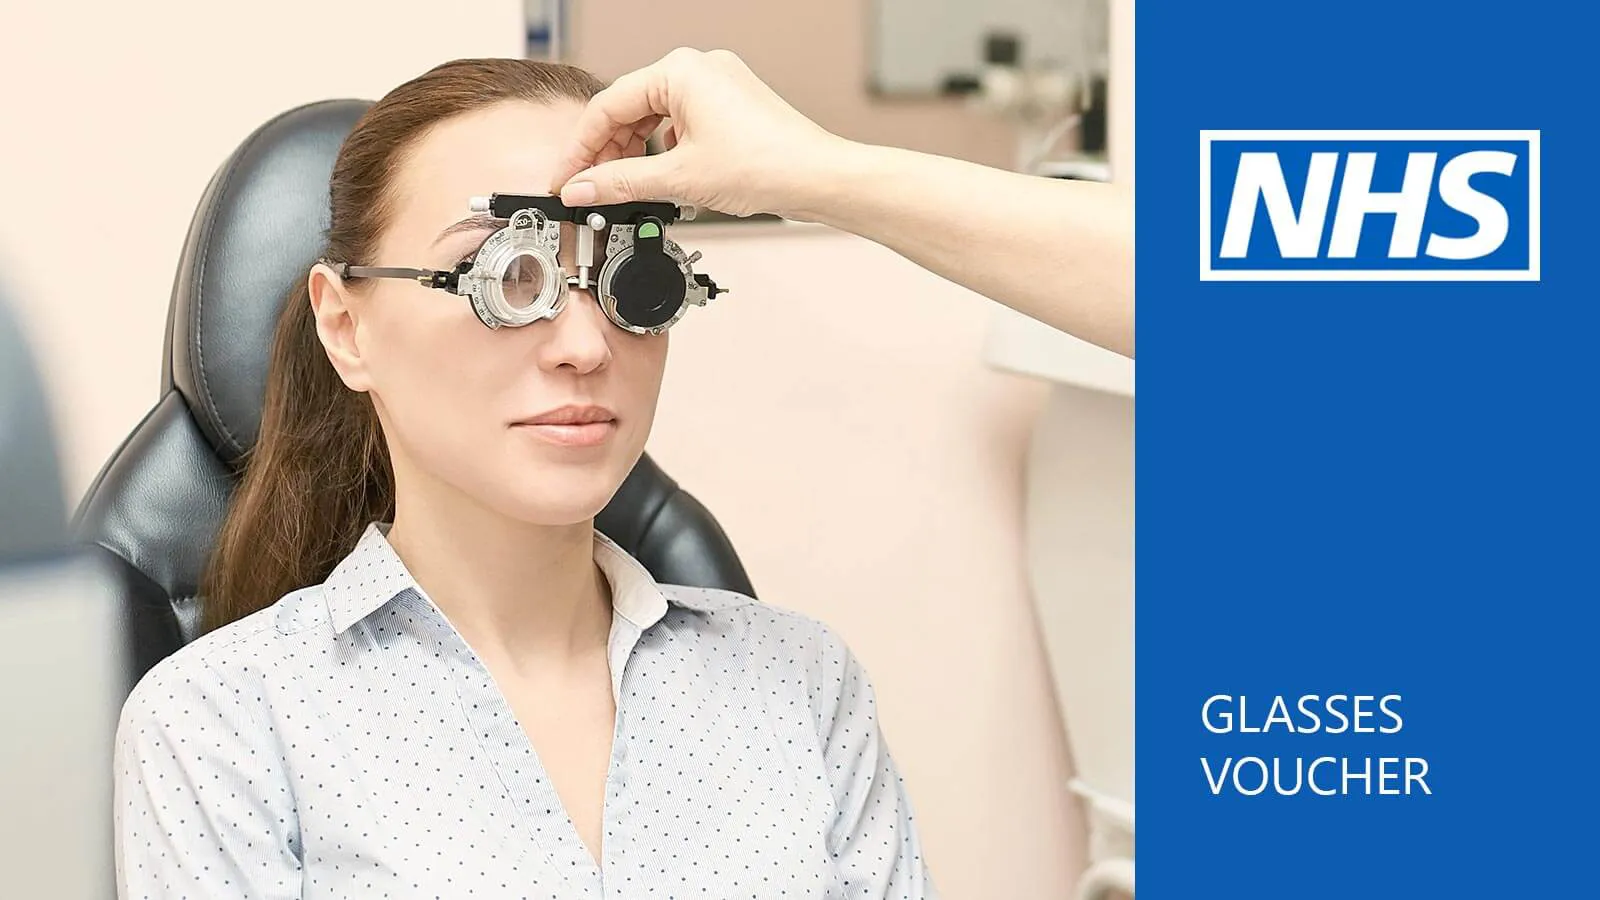 NHS glasses voucher - How much is it worth and what's the eligibility criteria?